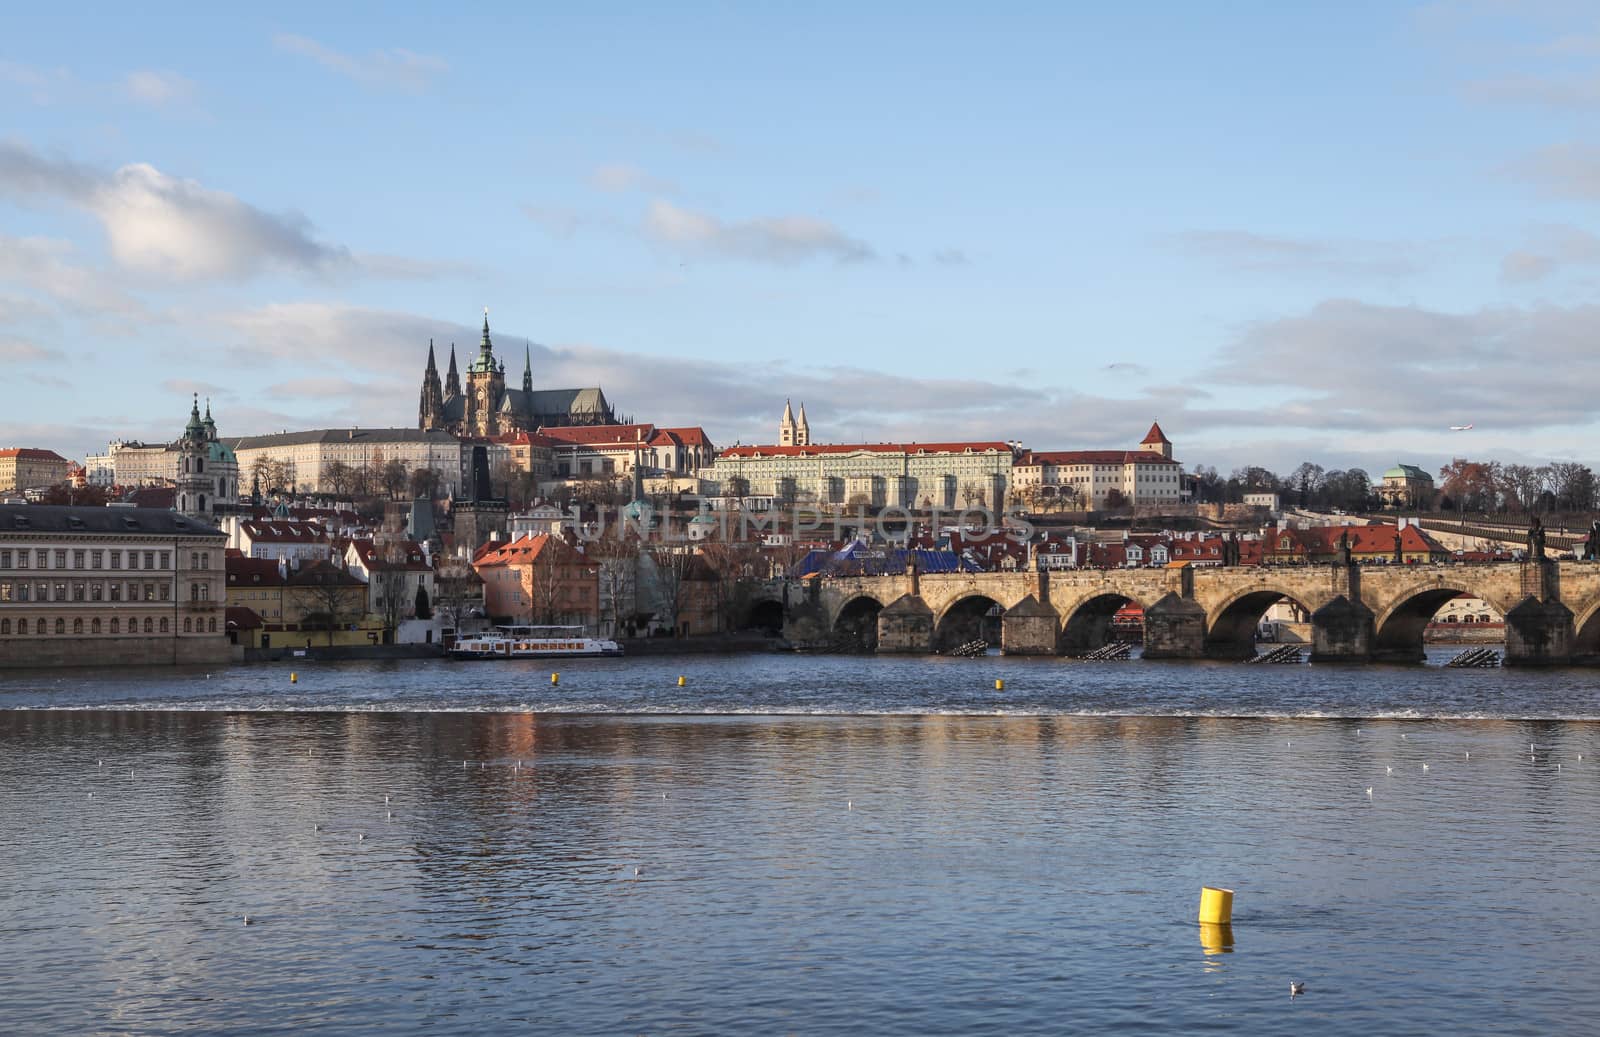 Prague, Czech Republic – January 02, 2013: View at the Prague Castle in Hradcany district and crowded Charles Bridge over the Vltava river in Prague, Czech Republic.